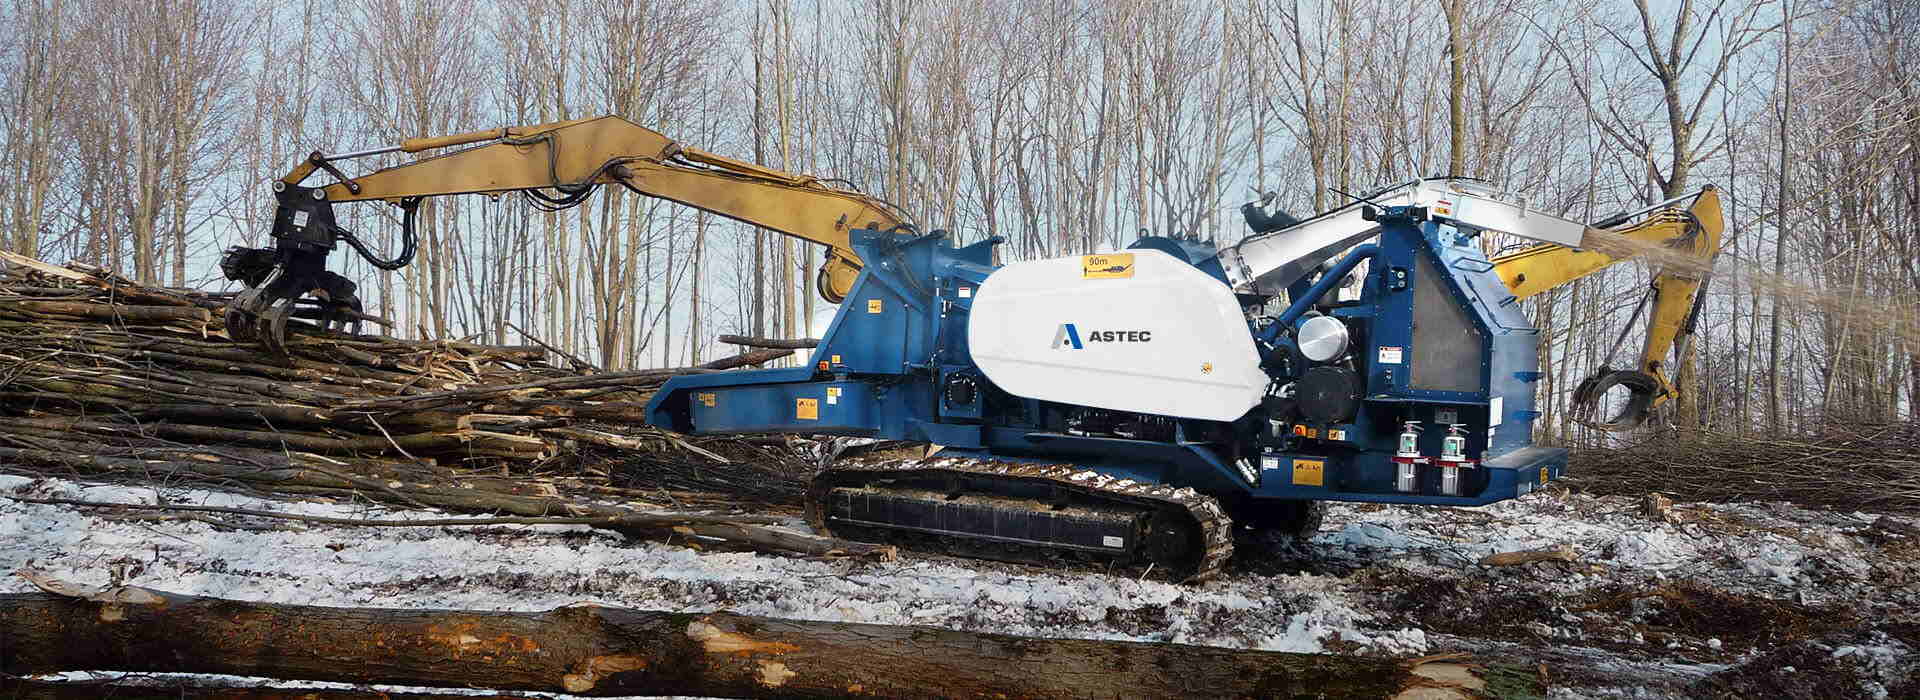 Peterson 4310B Highwalker Drum Chipper land clearing a right-of-way in the snow.